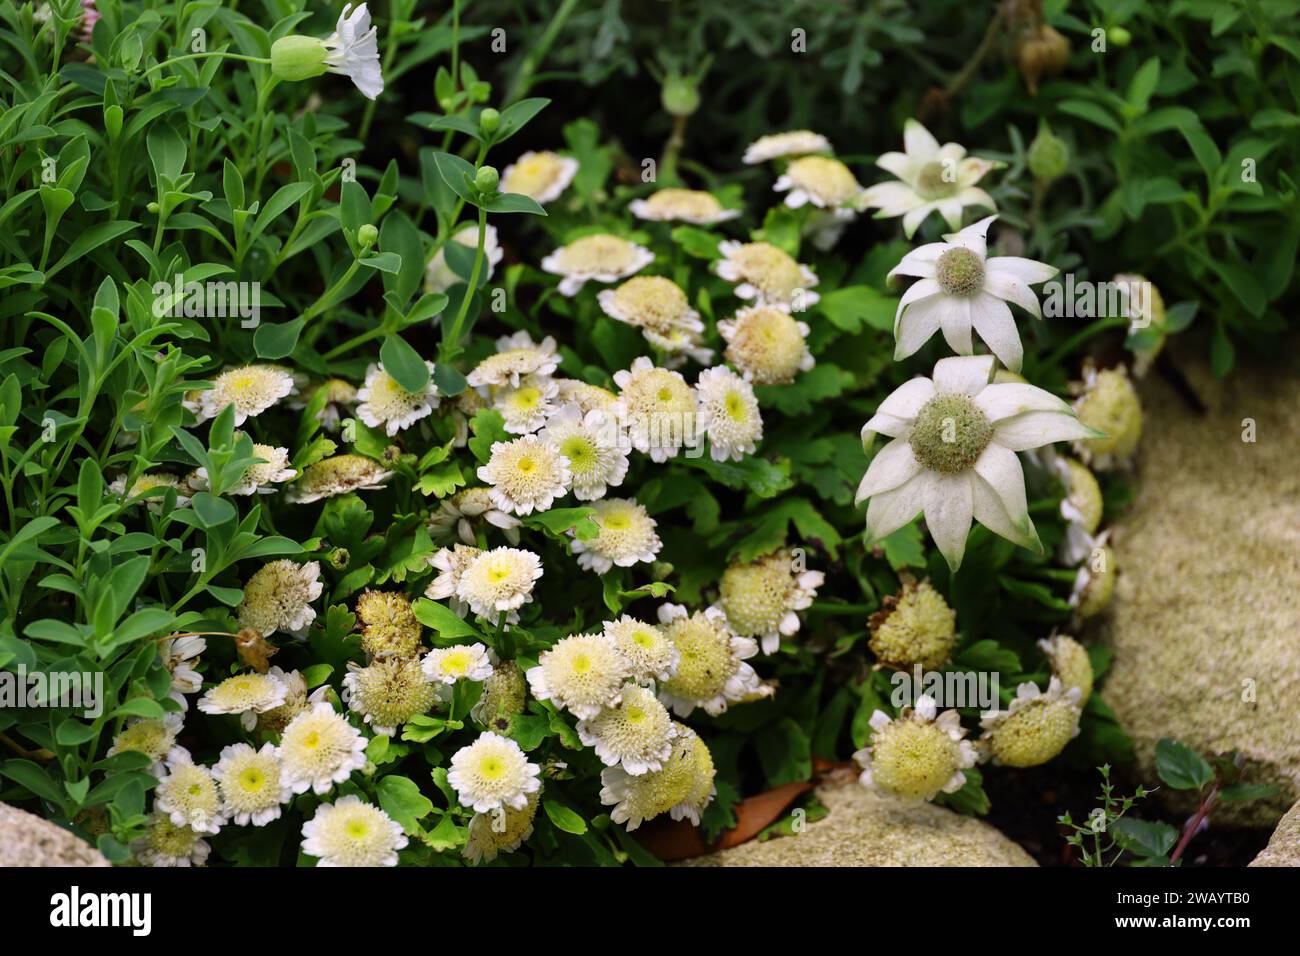 Flannel flowers and Rhodanthe chlorocephala flowers blooming in the garden in early spring Stock Photo